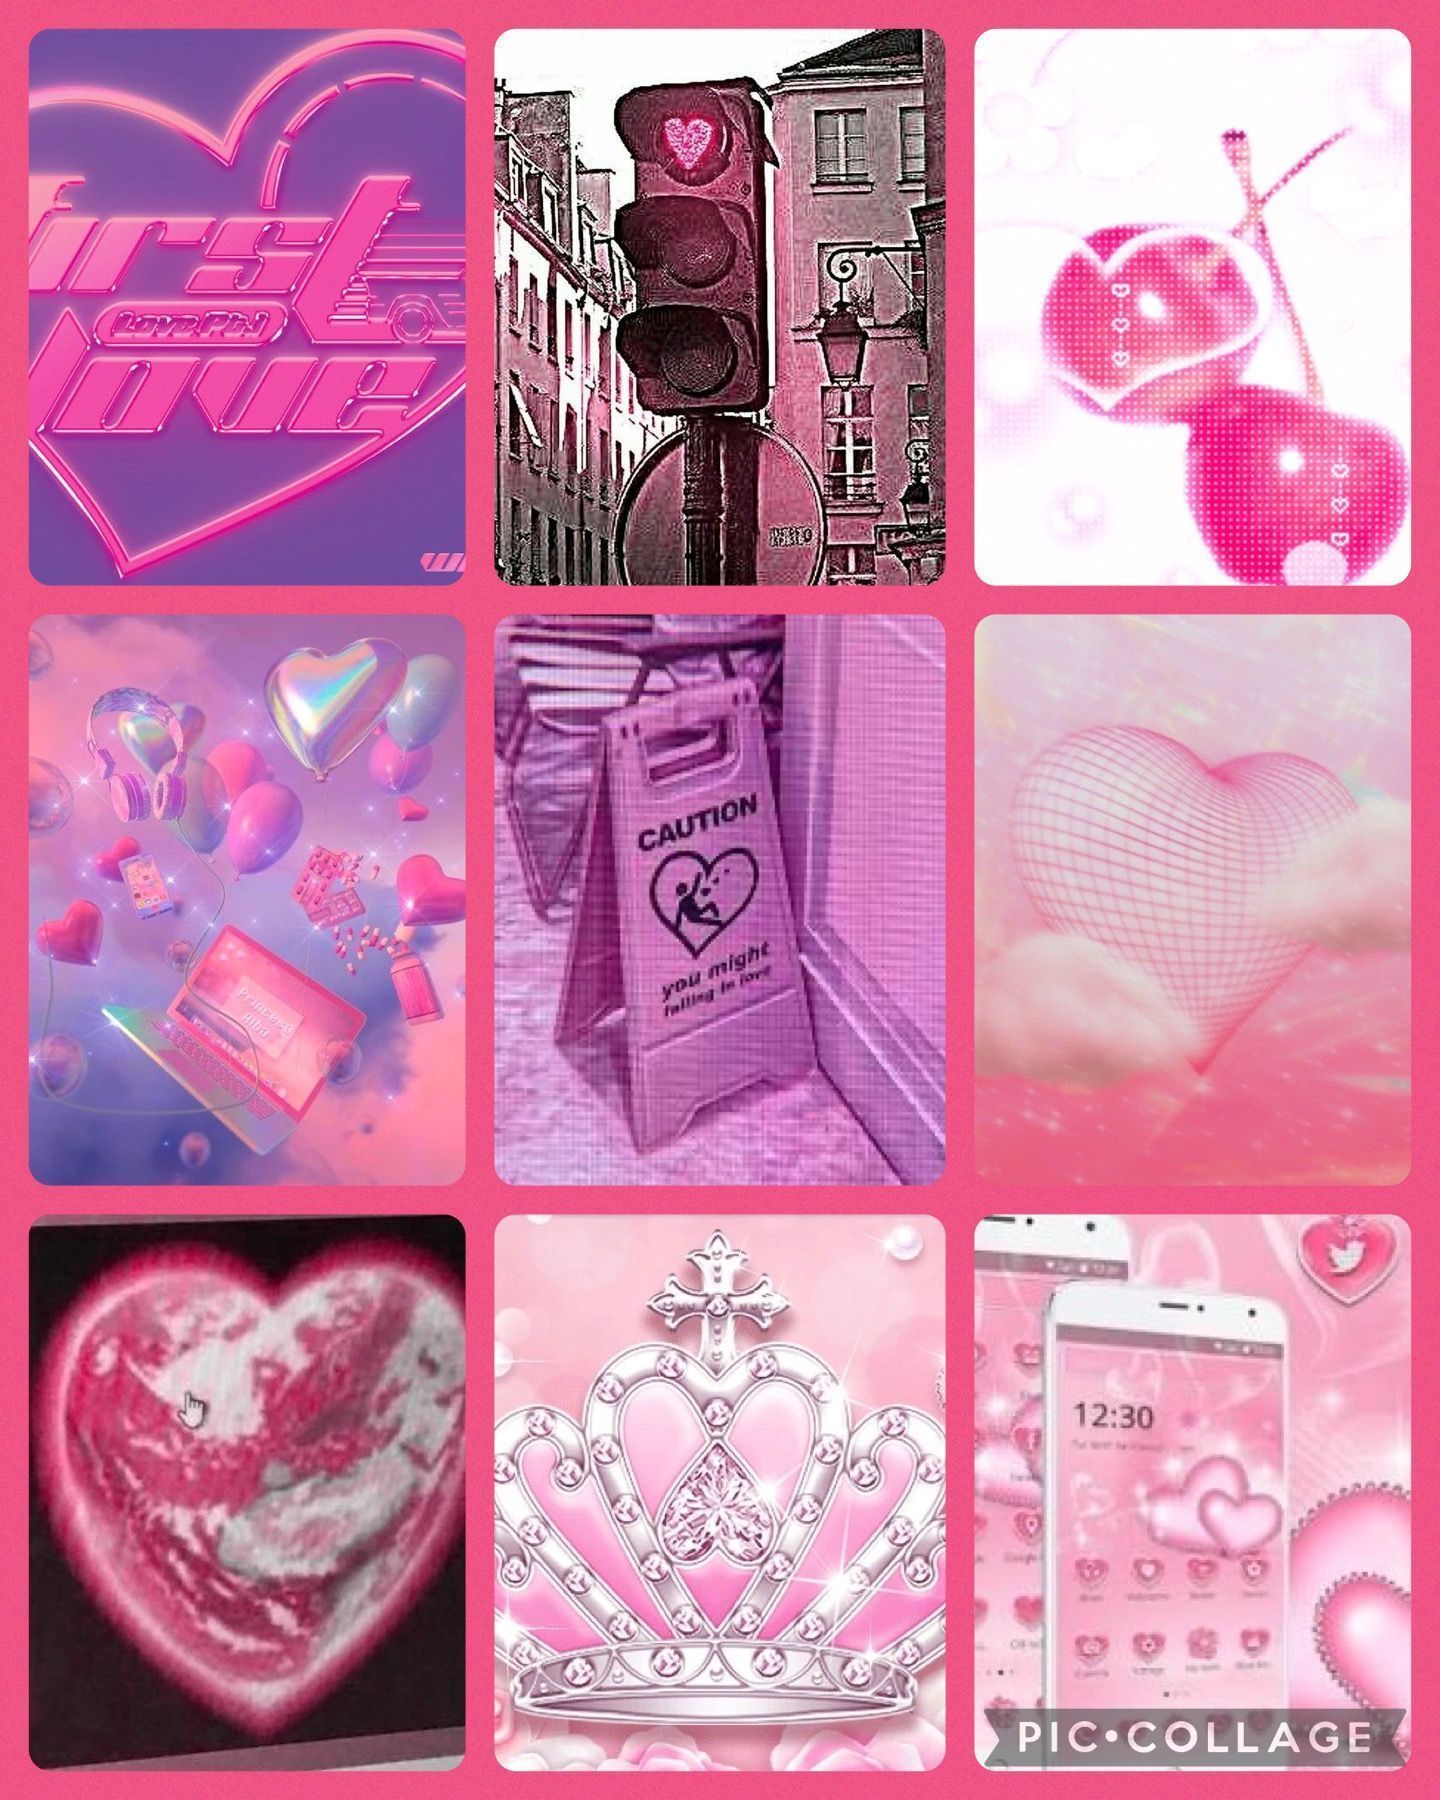 Pink aesthetic background for phone or desktop. - Lovecore, webcore